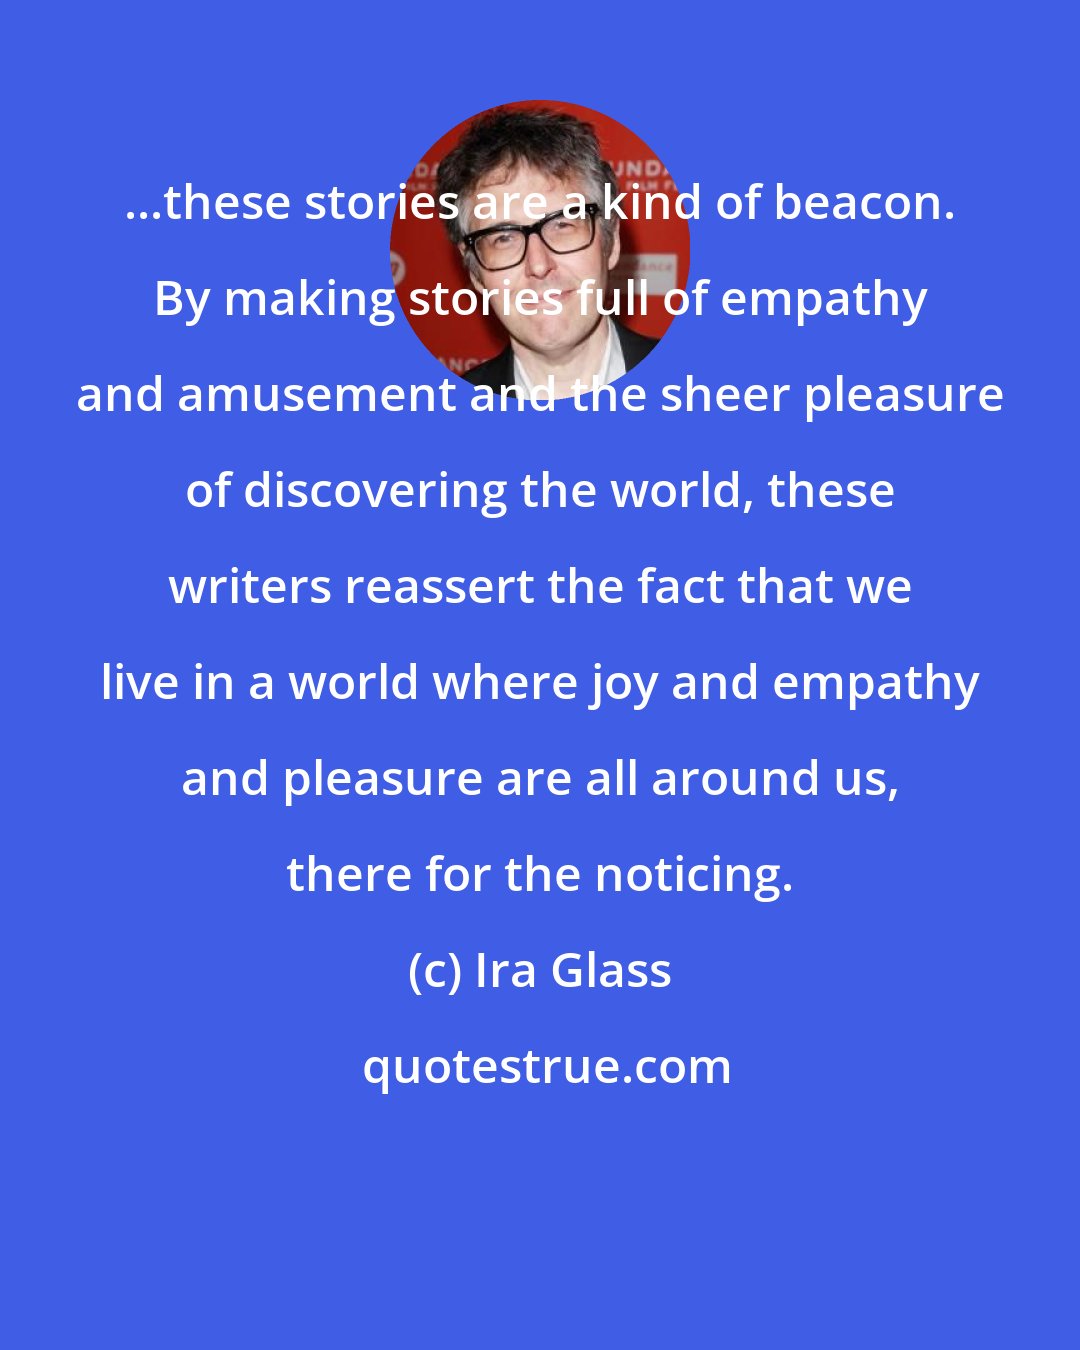 Ira Glass: ...these stories are a kind of beacon. By making stories full of empathy and amusement and the sheer pleasure of discovering the world, these writers reassert the fact that we live in a world where joy and empathy and pleasure are all around us, there for the noticing.